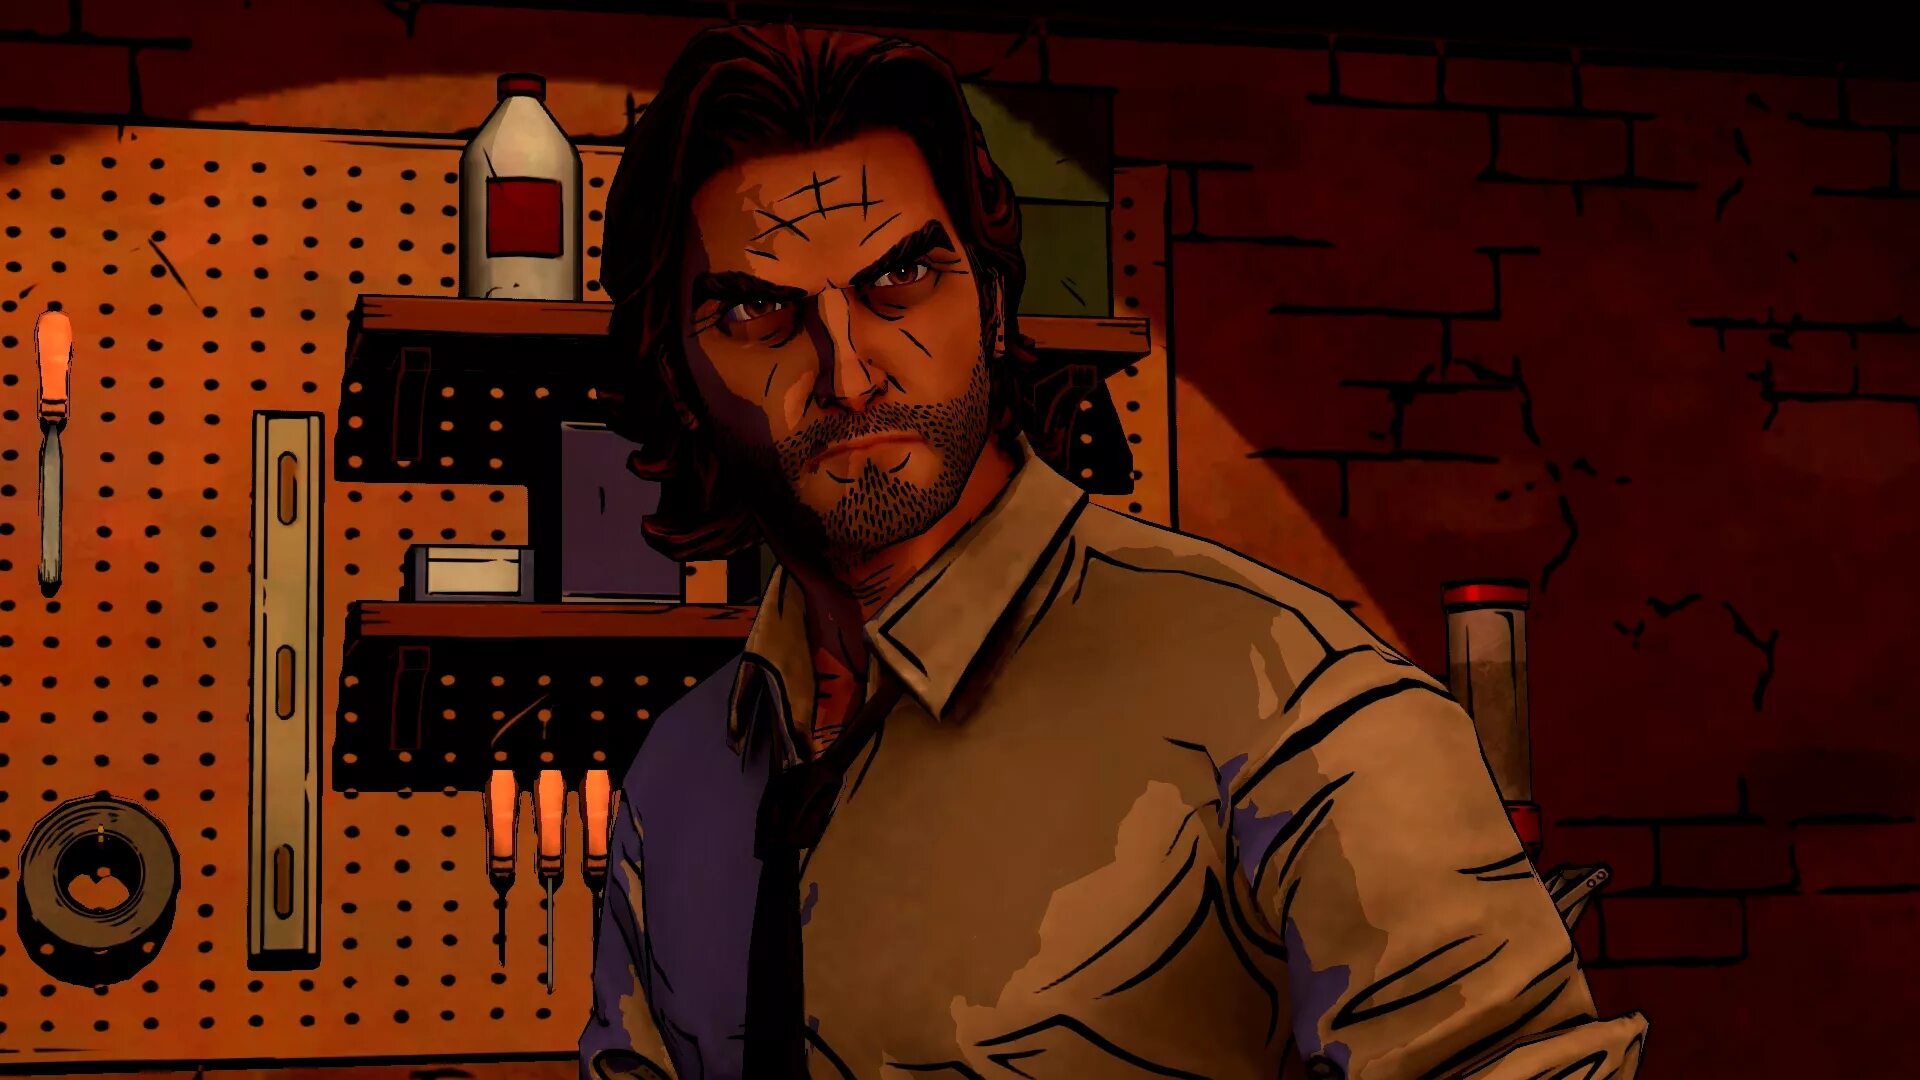 The Wolf among us игра. Bigby Wolf. The Wolf among us Бигби. The Wolf among us Bigby Wolf. The wolf among us дата выхода